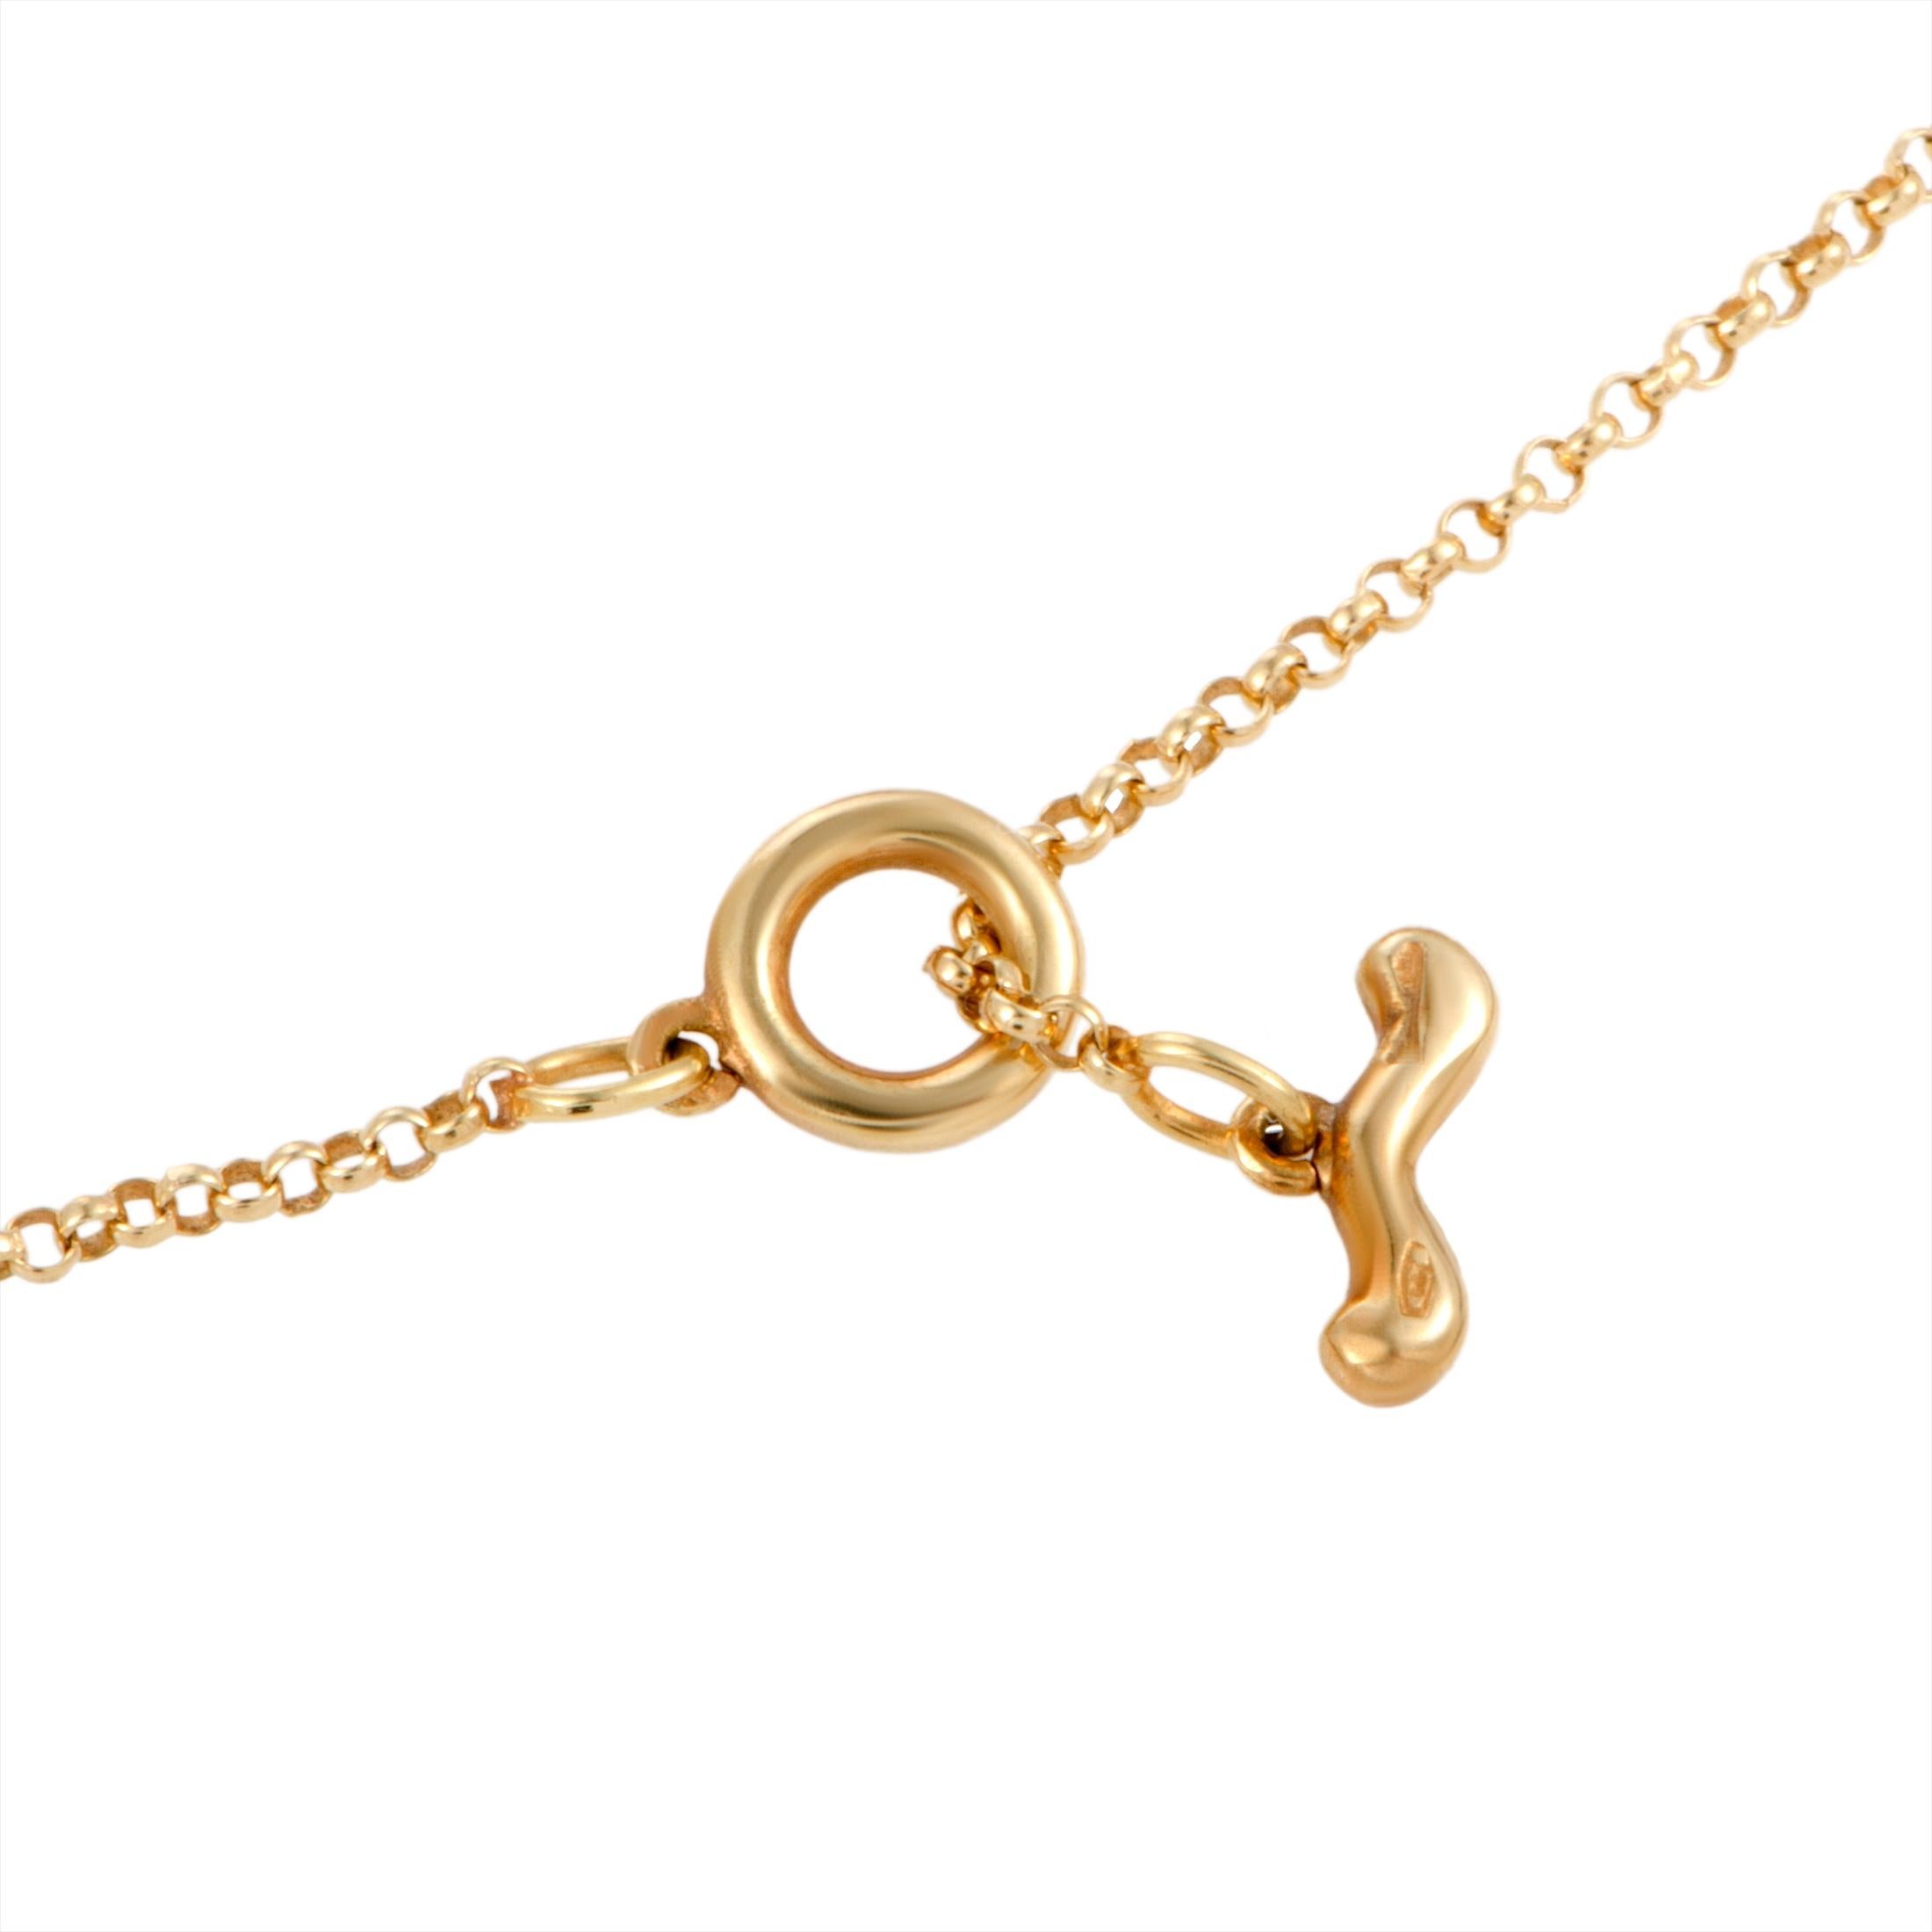 Add an attractive pop of color to your look with this gorgeous necklace that is presented by Antonini and designed in a splendidly elegant yet distinctly fashionable manner. The necklace is made of stylish 18K yellow gold and boasts a pendant set